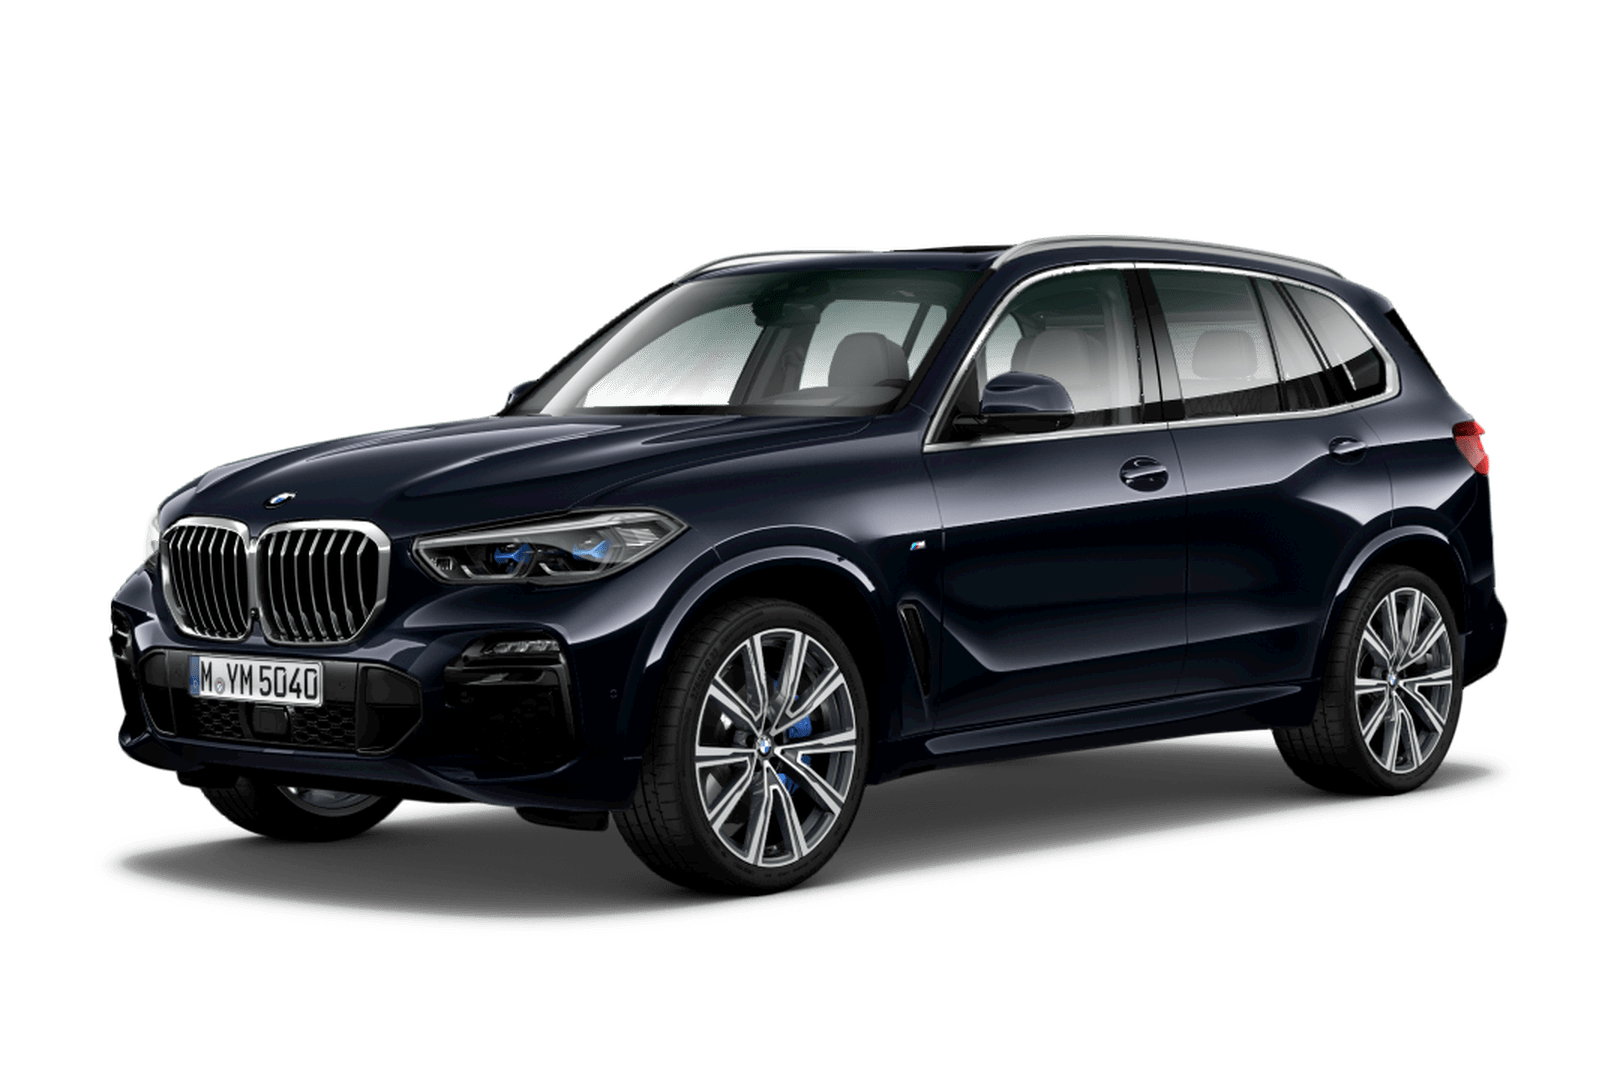 https://carsguide-res.cloudinary.com/image/upload/f_auto,fl_lossy,q_auto,t_default/v1/editorial/bmw-x5-my22-index-1.png